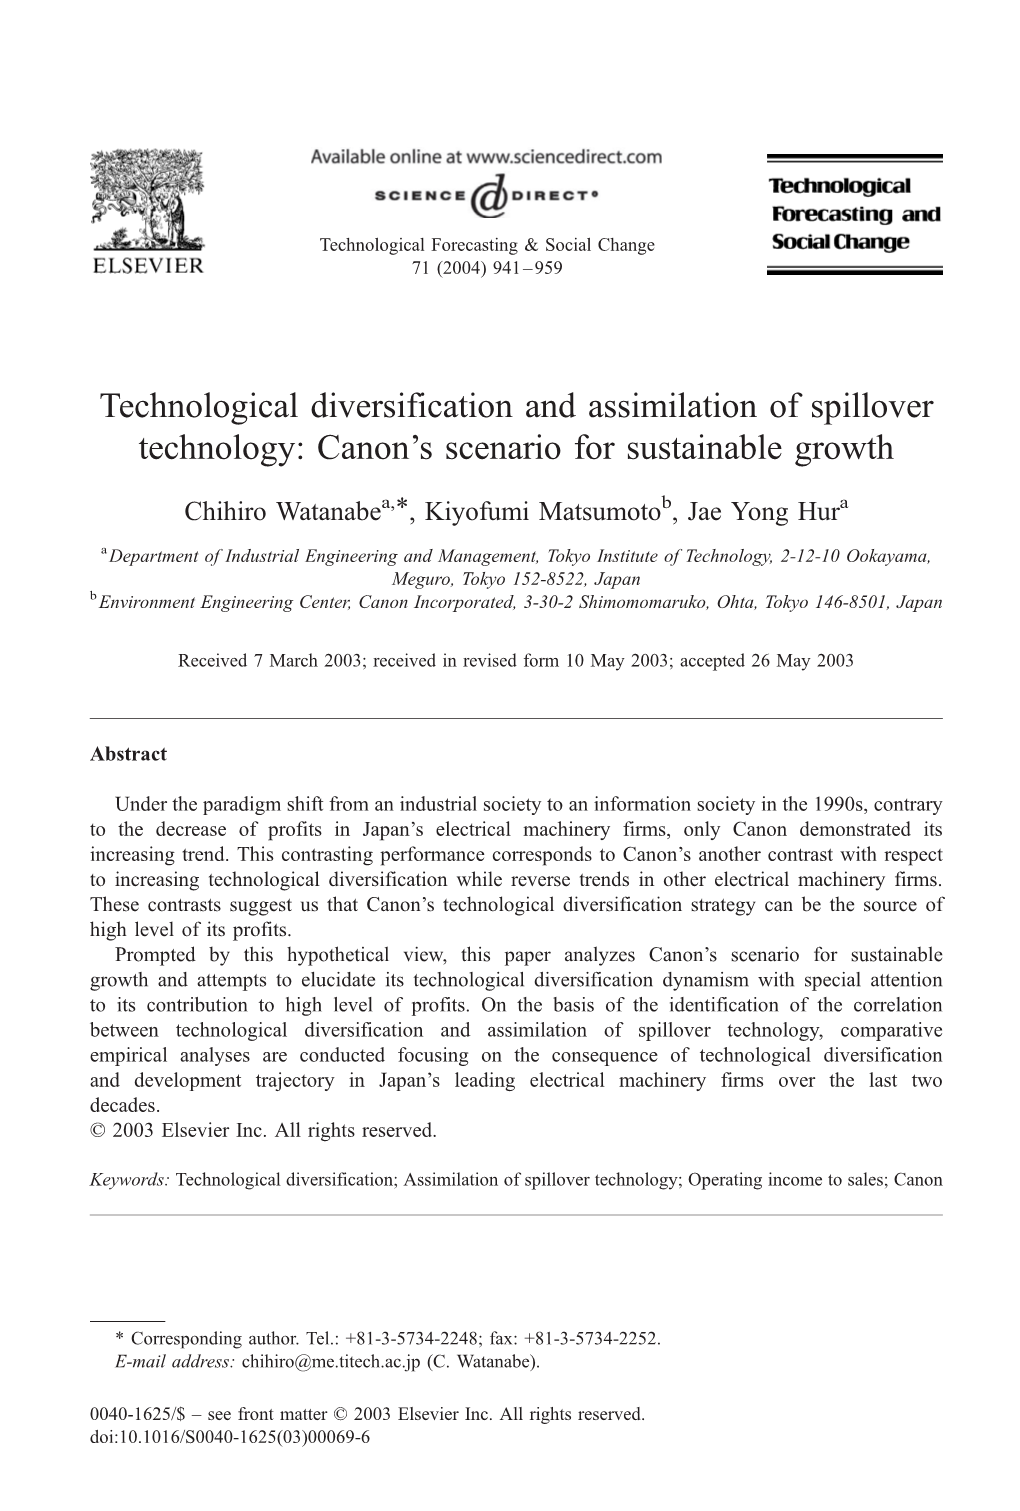 Technological Diversification and Assimilation of Spillover Technology: Canon’S Scenario for Sustainable Growth